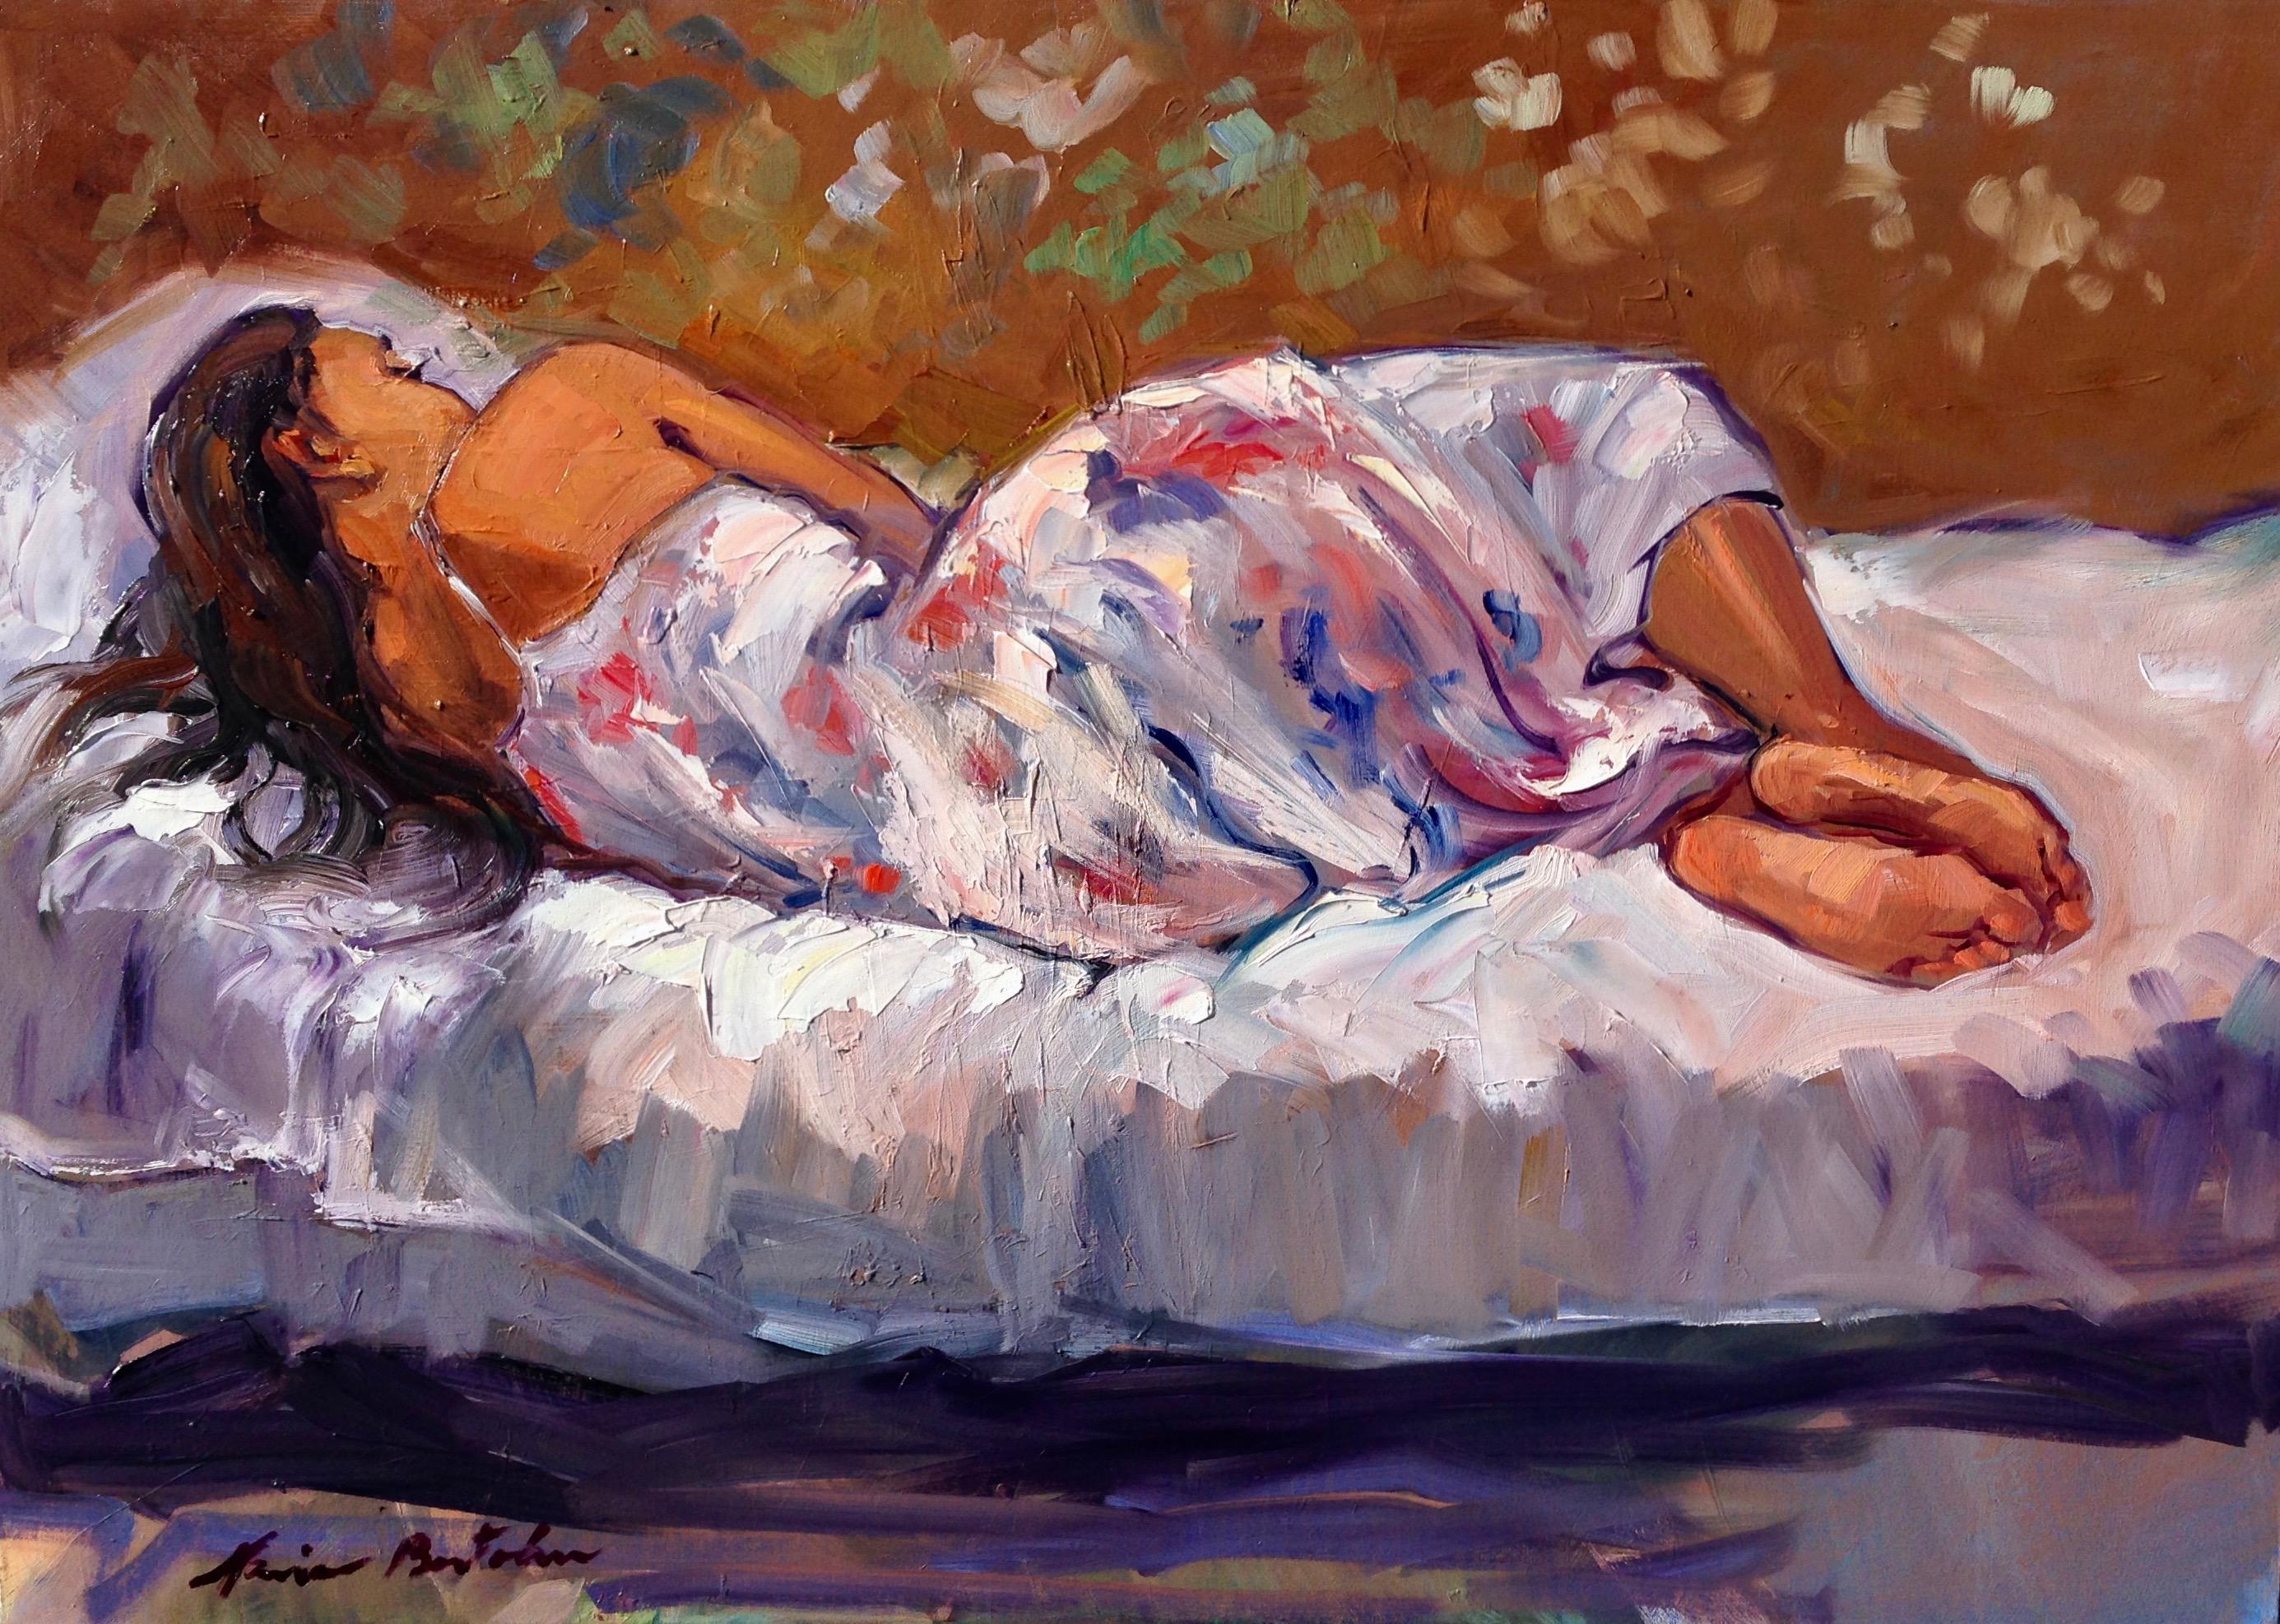 Maria Bertrán Figurative Painting - "Summer Siesta" Contemporary Impressionist Figure Oil Painting